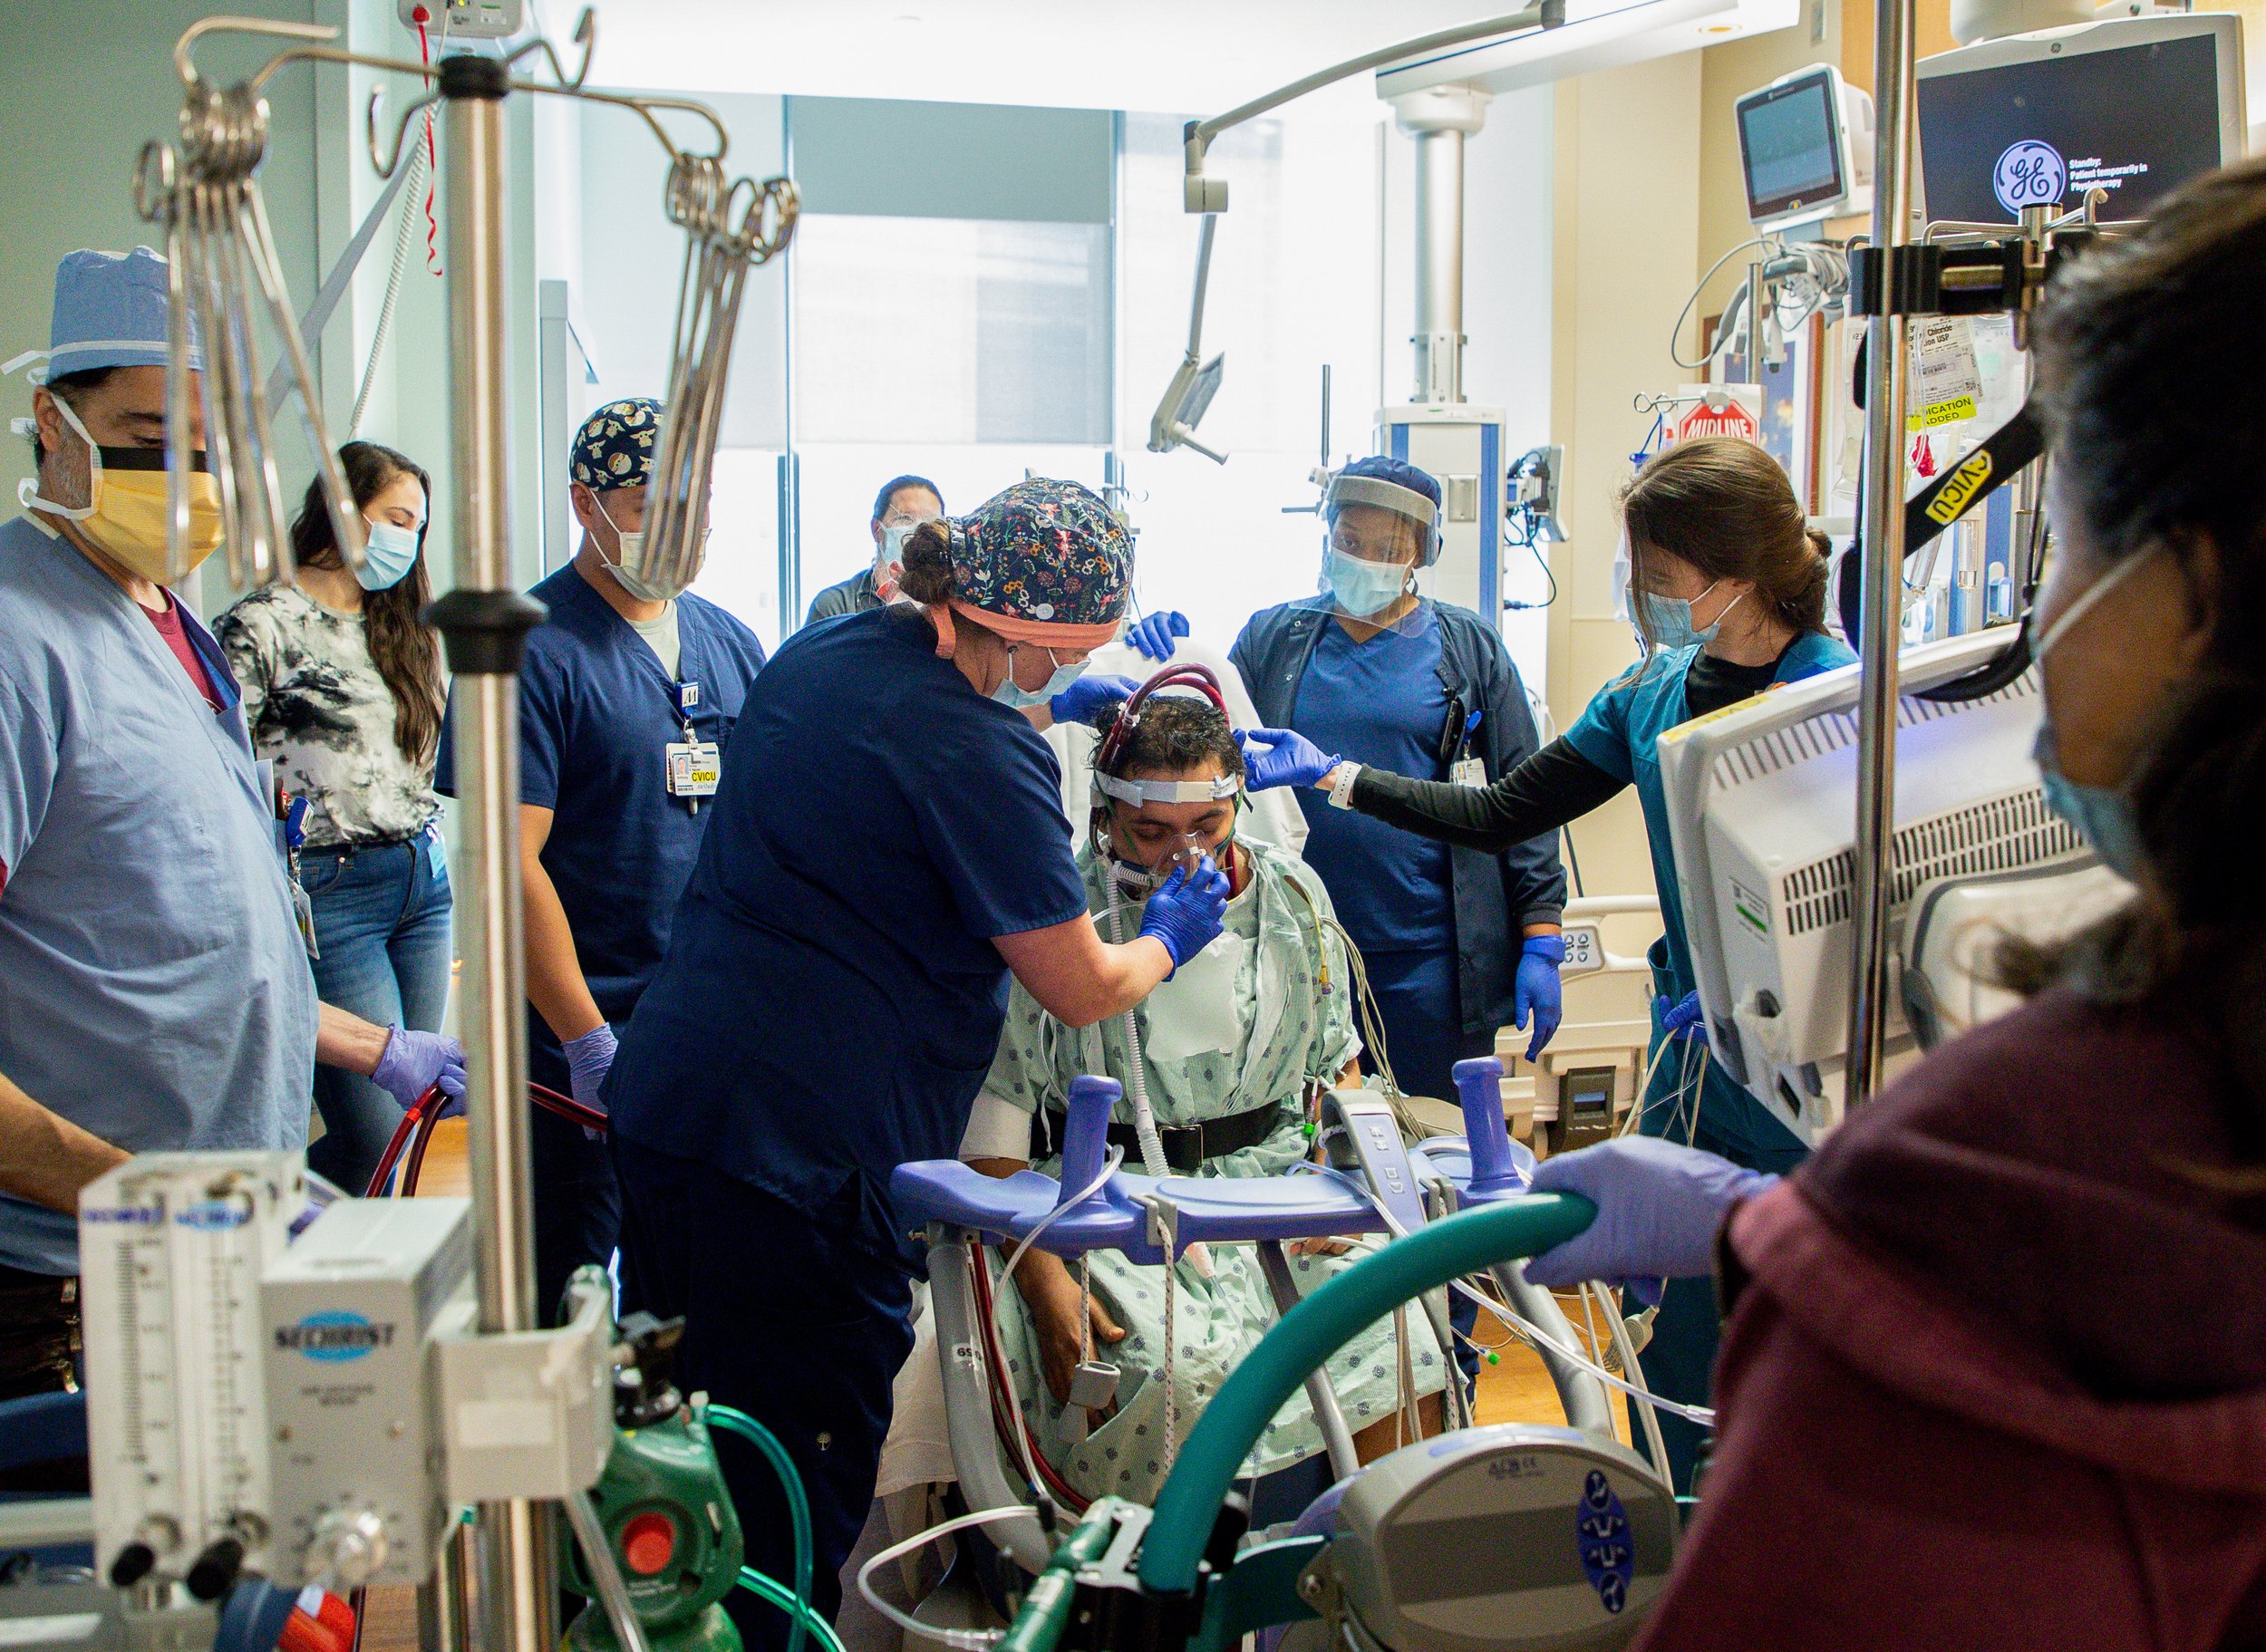  More than 200 COVID-19 patients have received a lung transplant in the United States, including 16 at Houston Methodist Hospital – the most in Texas and third most in the country.   Jesus Ceja Ceja is one of those people in need of a double lung tra